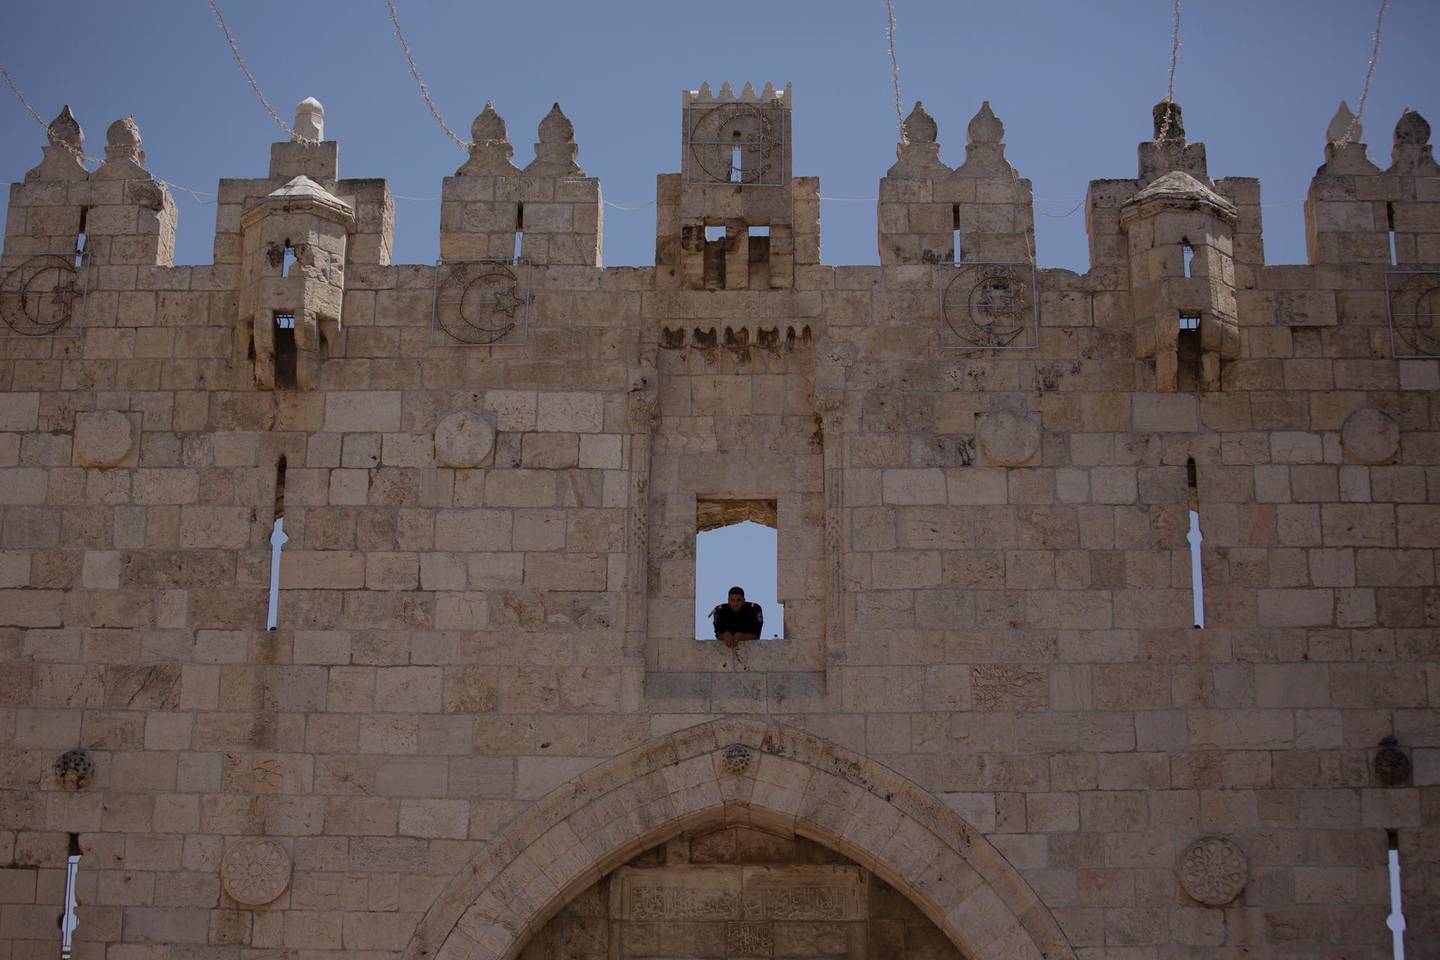 Israeli policeman uses the Damascus Gate to watch Muslim worshippers leave the Old City of Jerusalem after Friday prayers during the Muslim holy month of Ramadan, on Friday, April 23, 2021 in Jerusalem.  Israeli police say 44 people were arrested and 20 officers were wounded in a night of chaos in Jerusalem, where security forces separately clashed with Palestinians angry about Ramadan restrictions and Jewish extremists who held an anti-Arab march nearby. (AP Photo/Maya Alleruzzo)